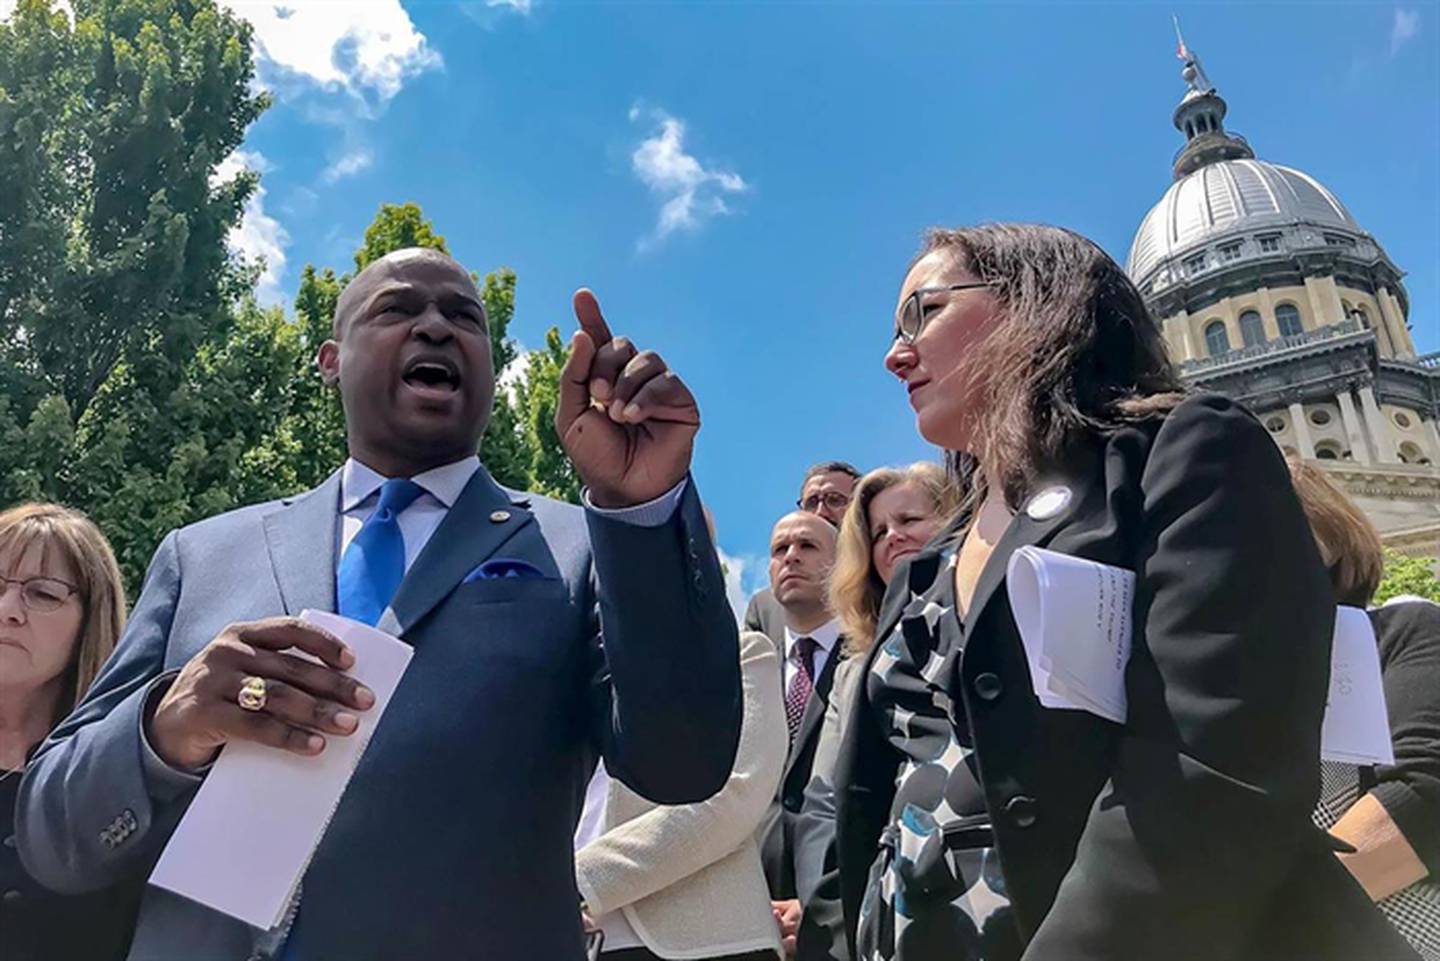 Reps. Emanuel "Chris" Welch of Hillside, who is now House speaker, and Kelly Cassidy of Chicago speak in 2019 at a rally for the Reproductive Health Act. (Capitol News Illinois file photo)